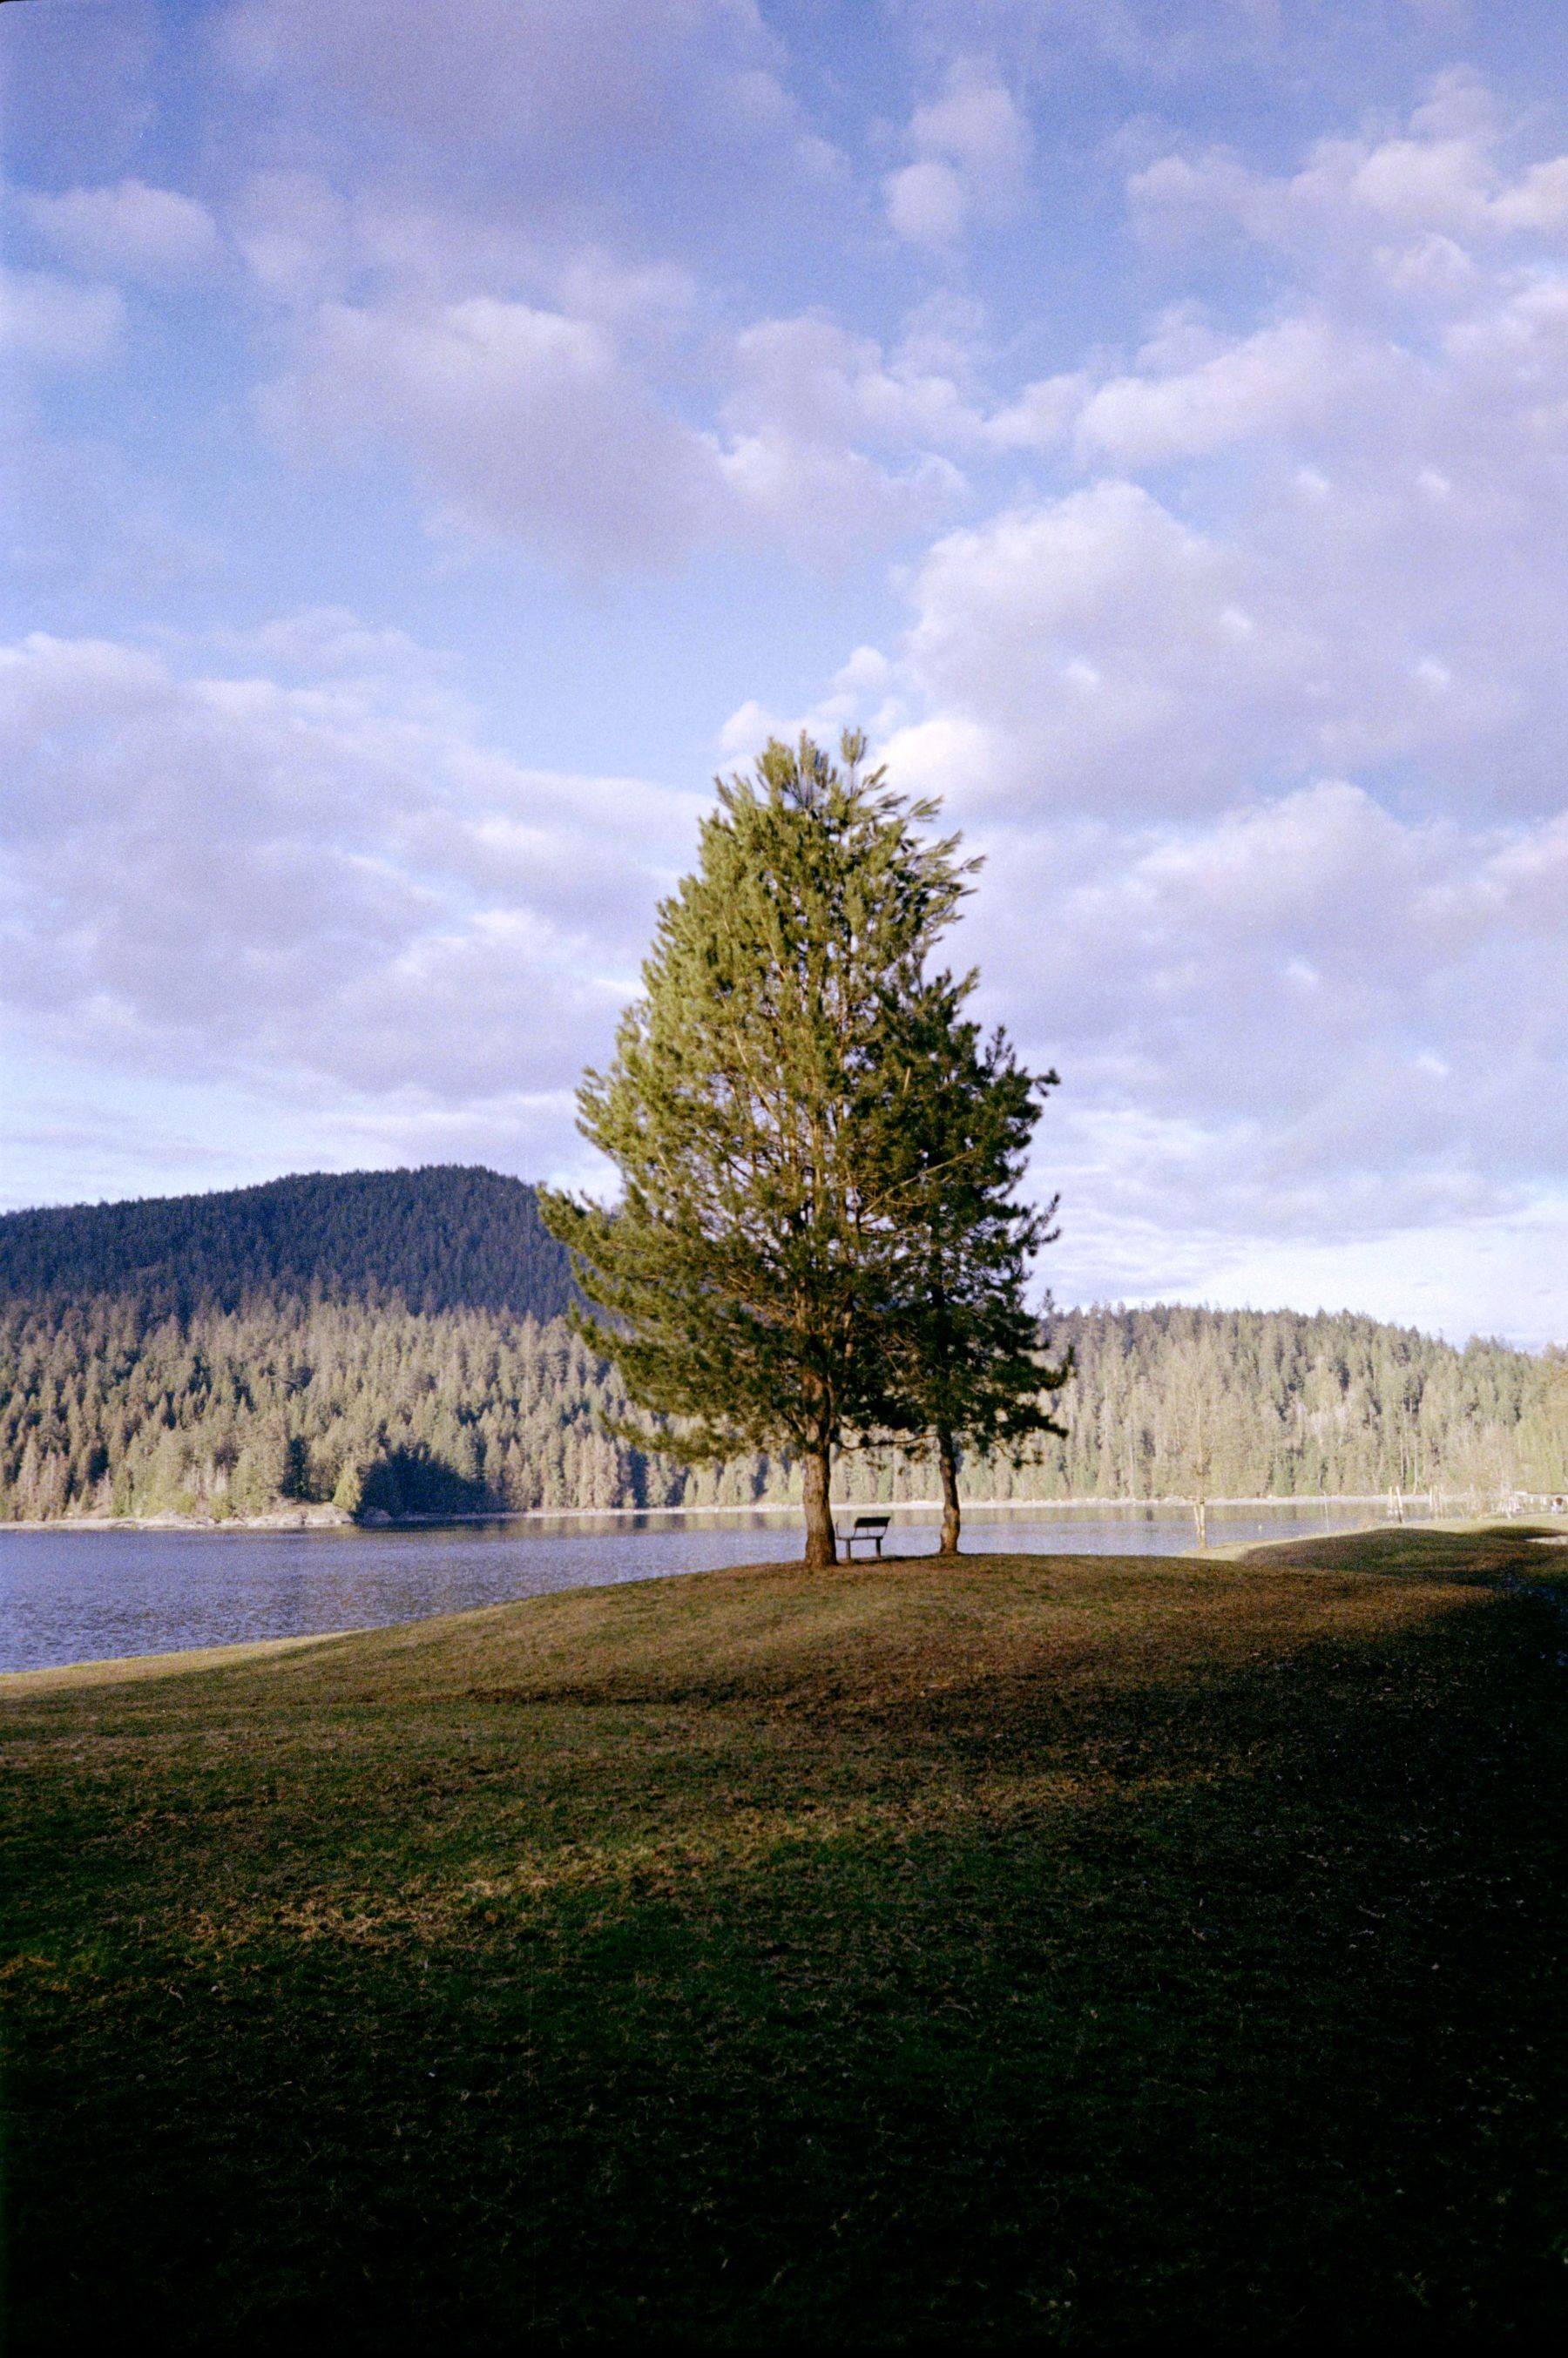 Two trees on a cut grass hill in the distance with the body of water and an island in view. Shot on Pentax Espio Mini.